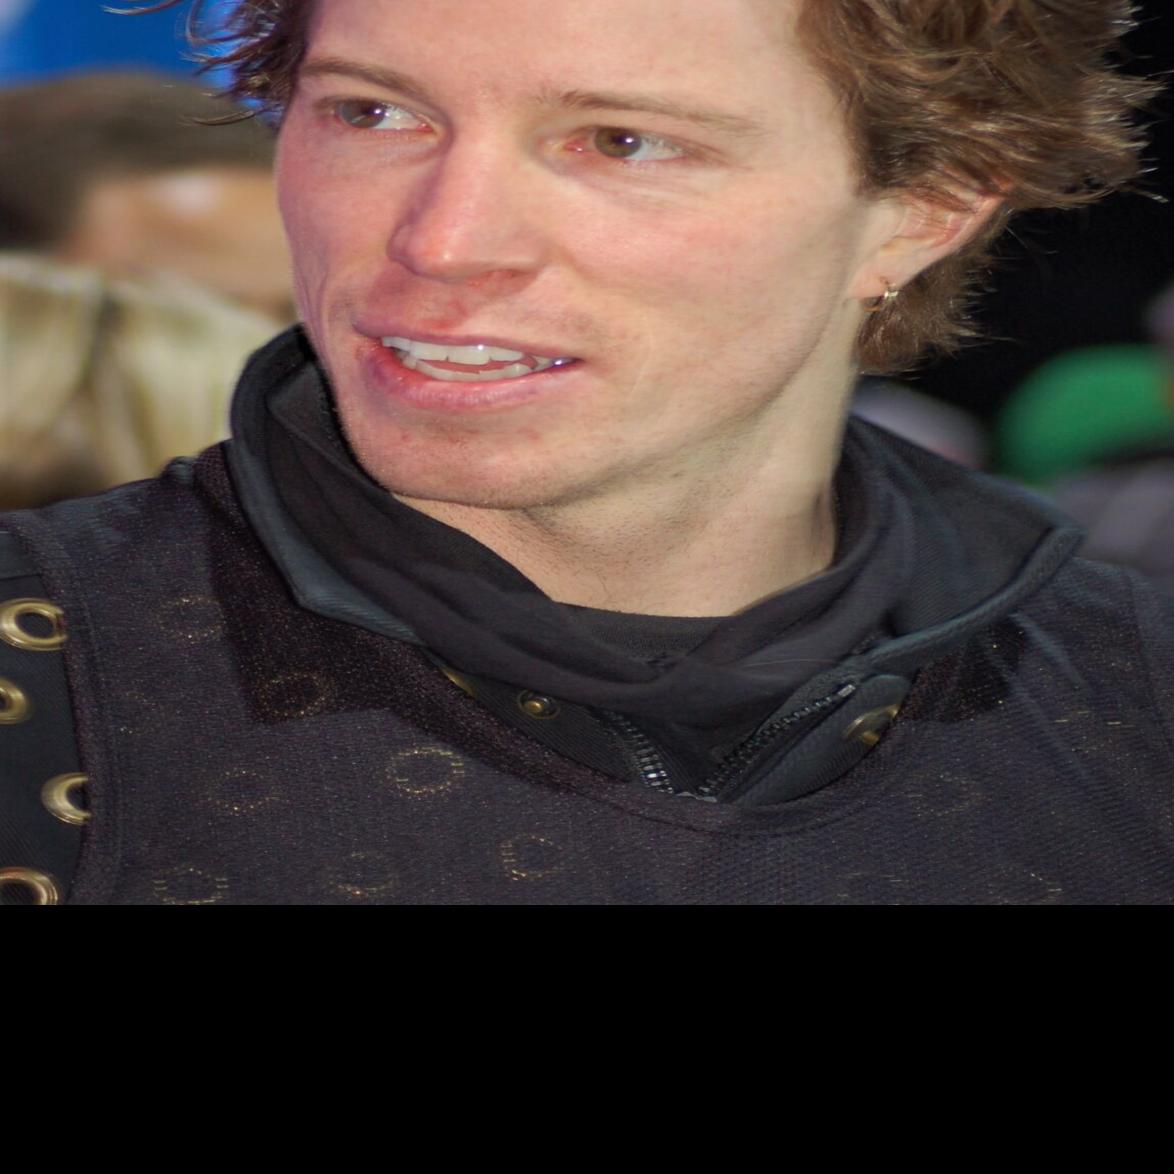 Shaun White opted out of the X Games, so this Connecticut